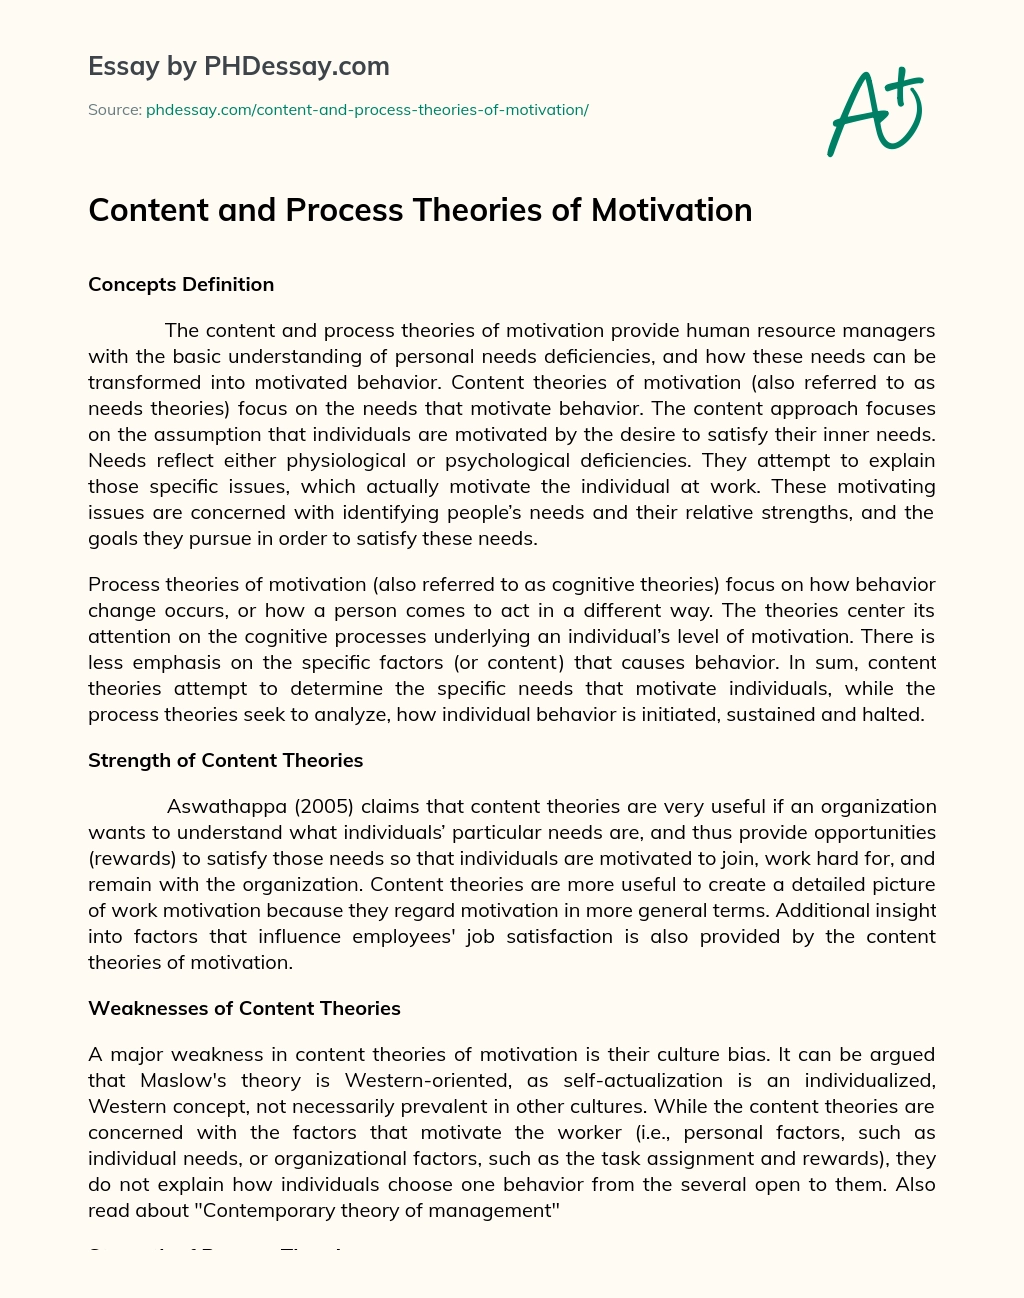 Content and Process Theories of Motivation essay